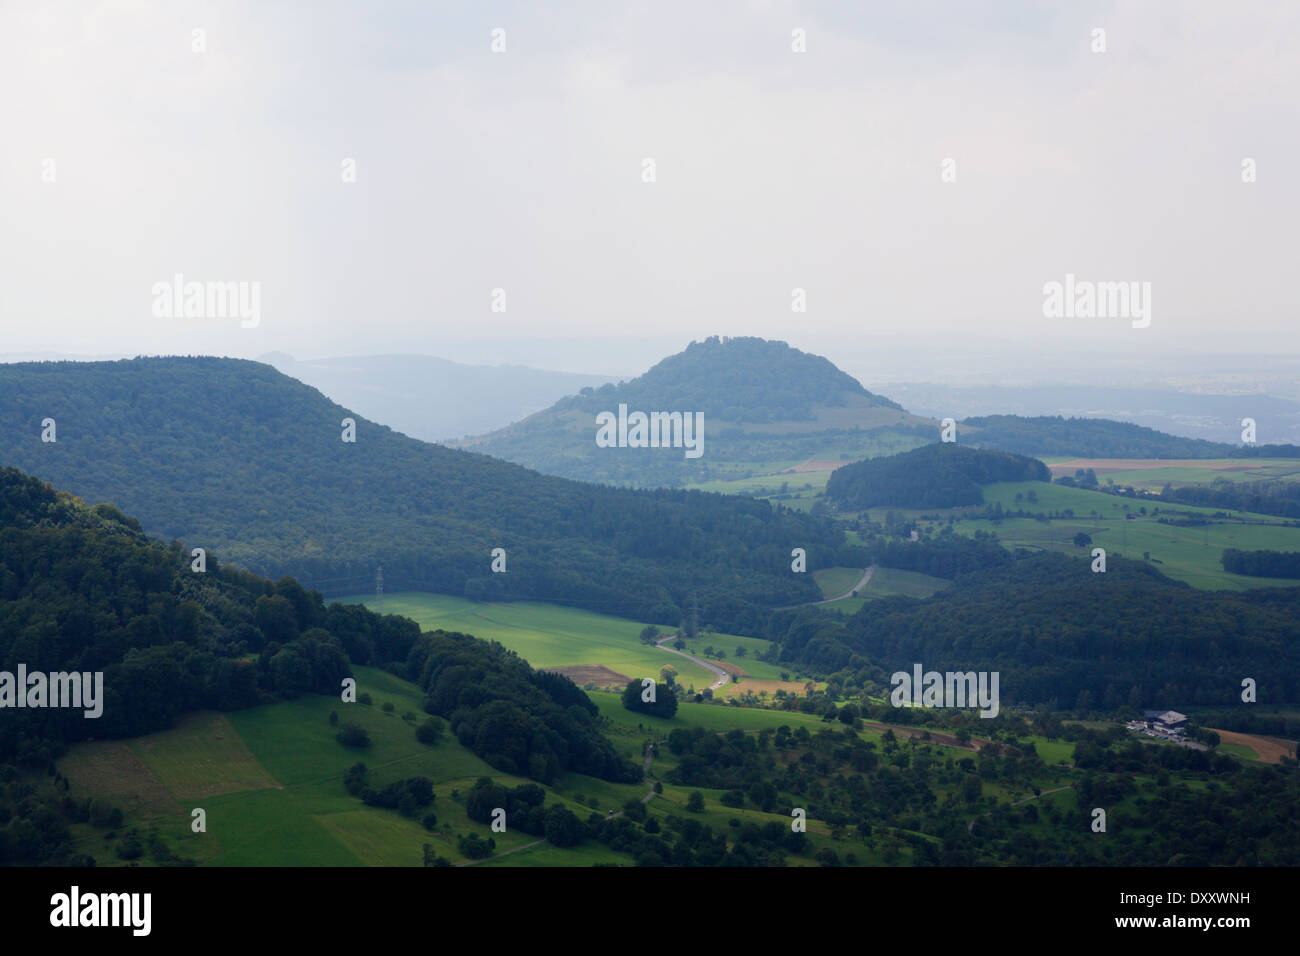 Germany, Baden-Wurttemberg, Swabian Alb, Ross Mountain, View from Ross Mountain, overlooking Achalm, Mountain, Deutschland, Stock Photo